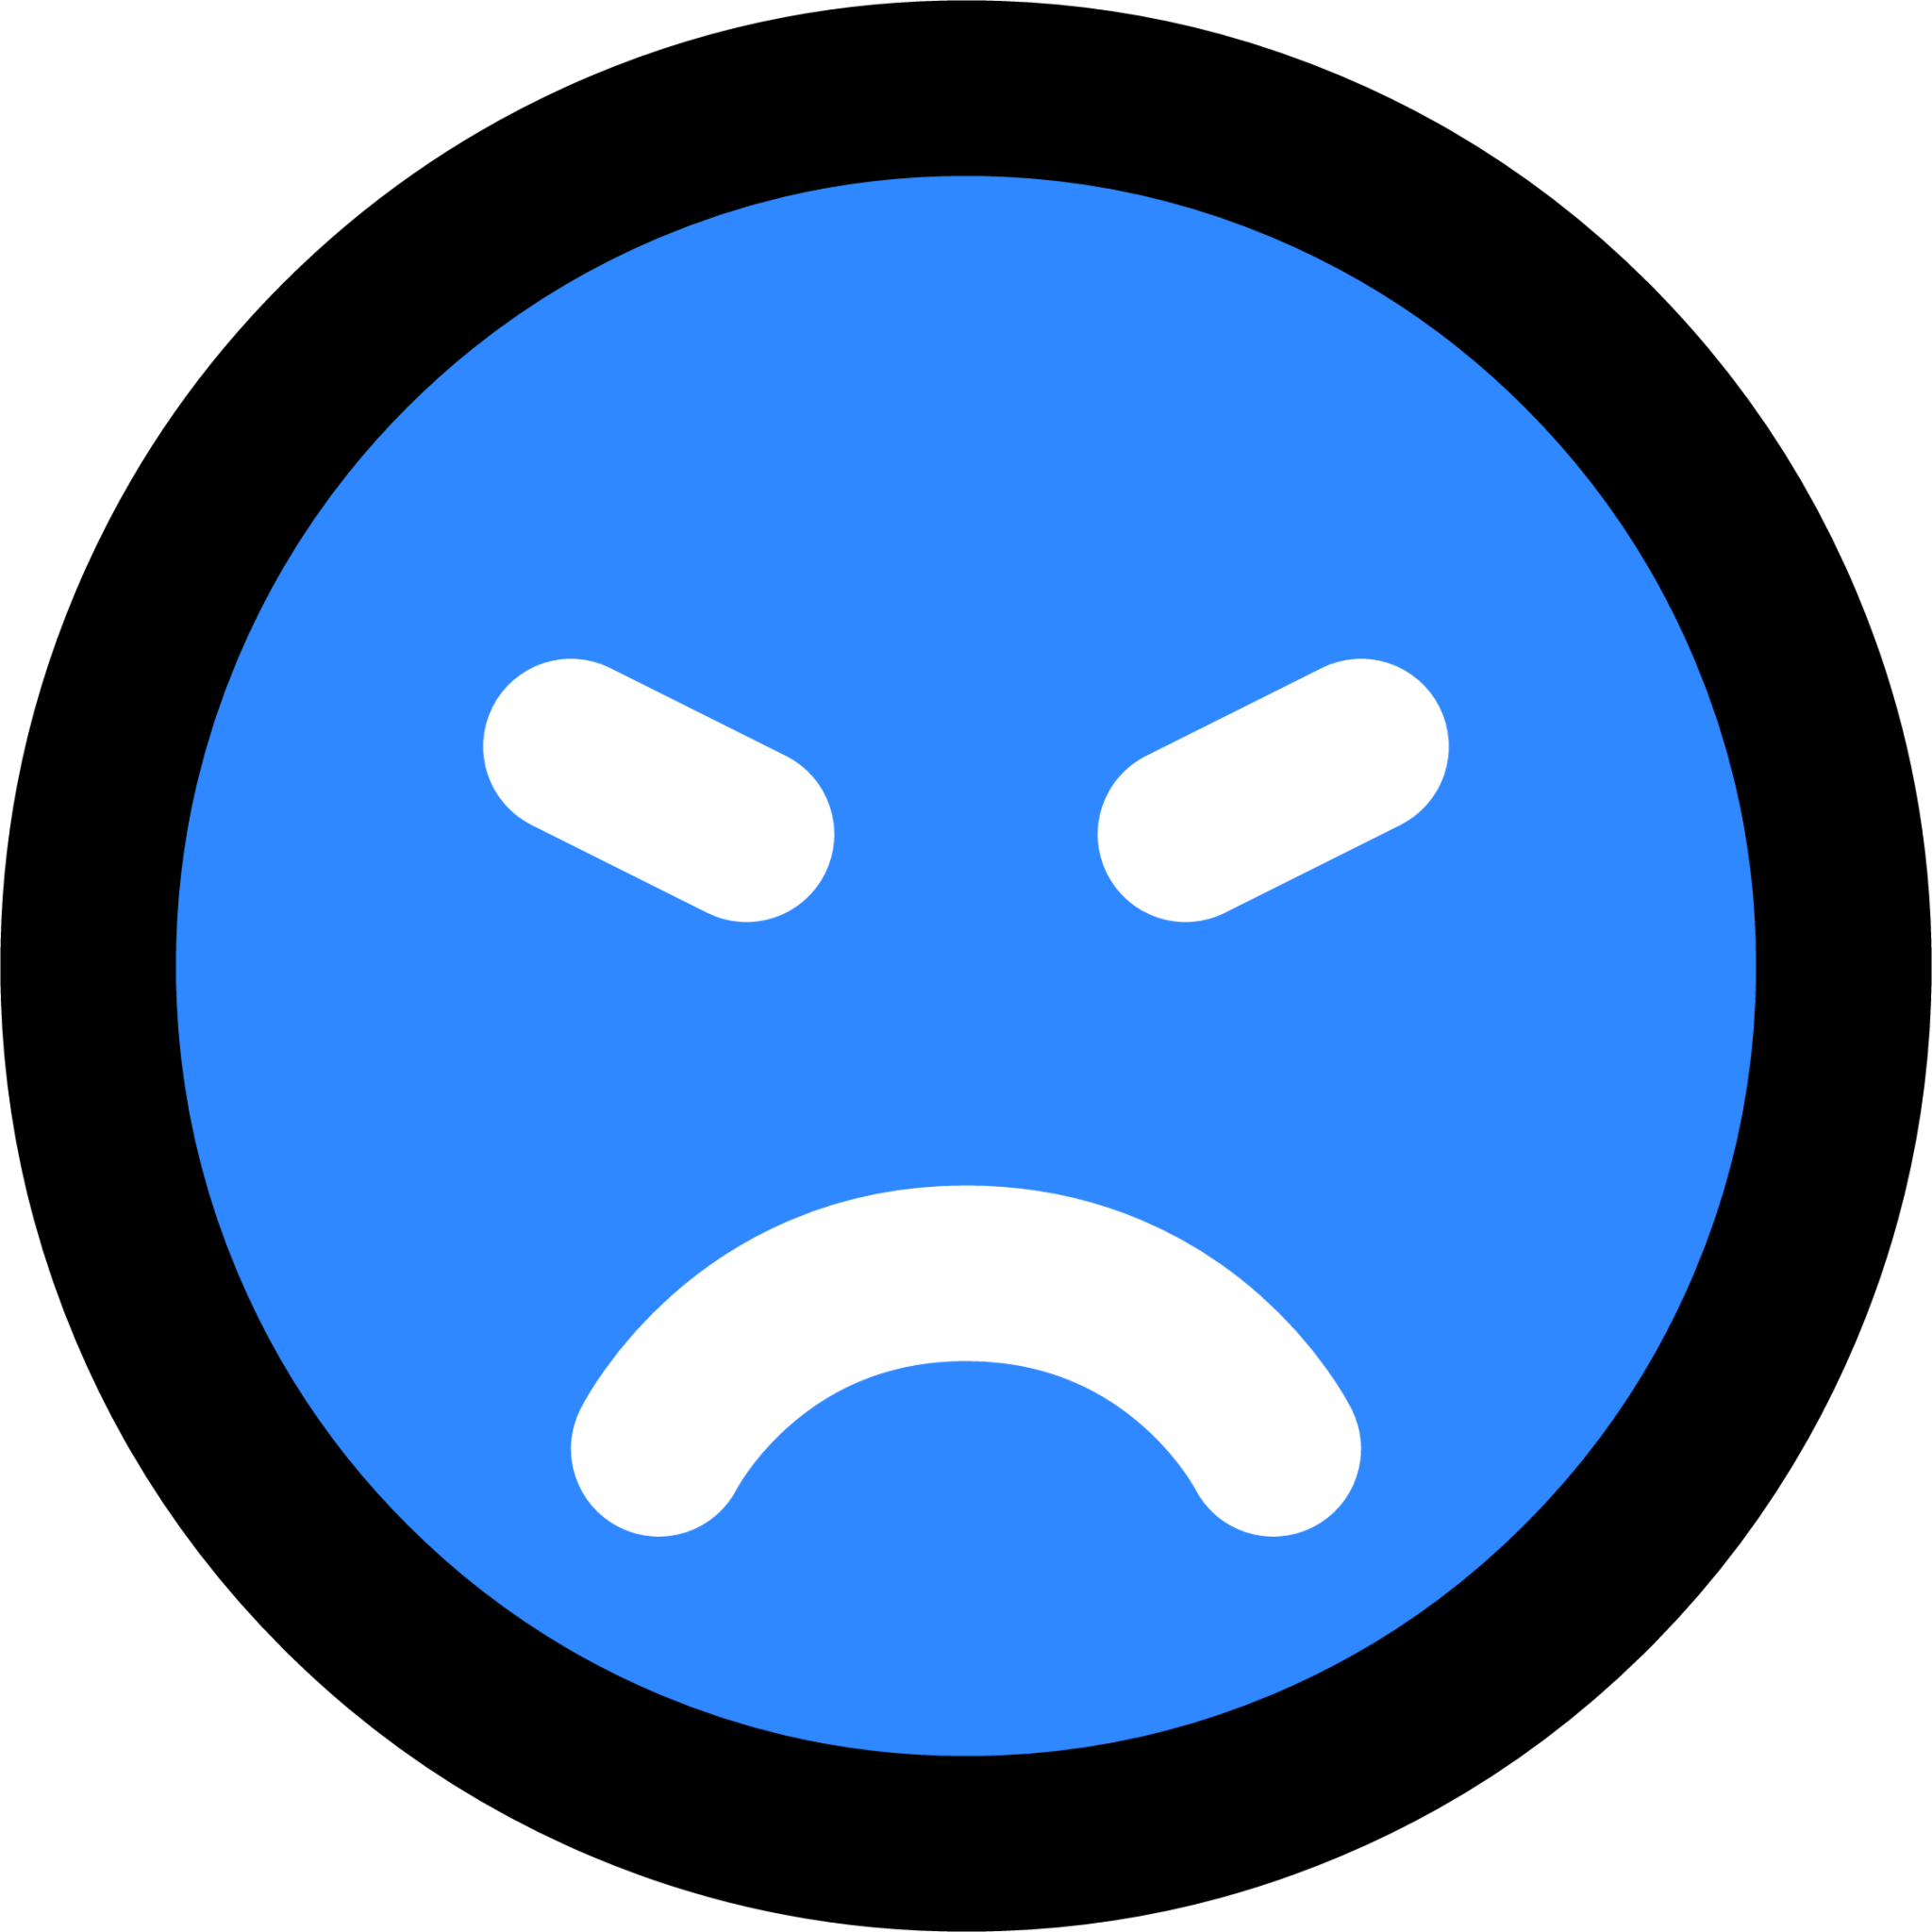 angry face icon